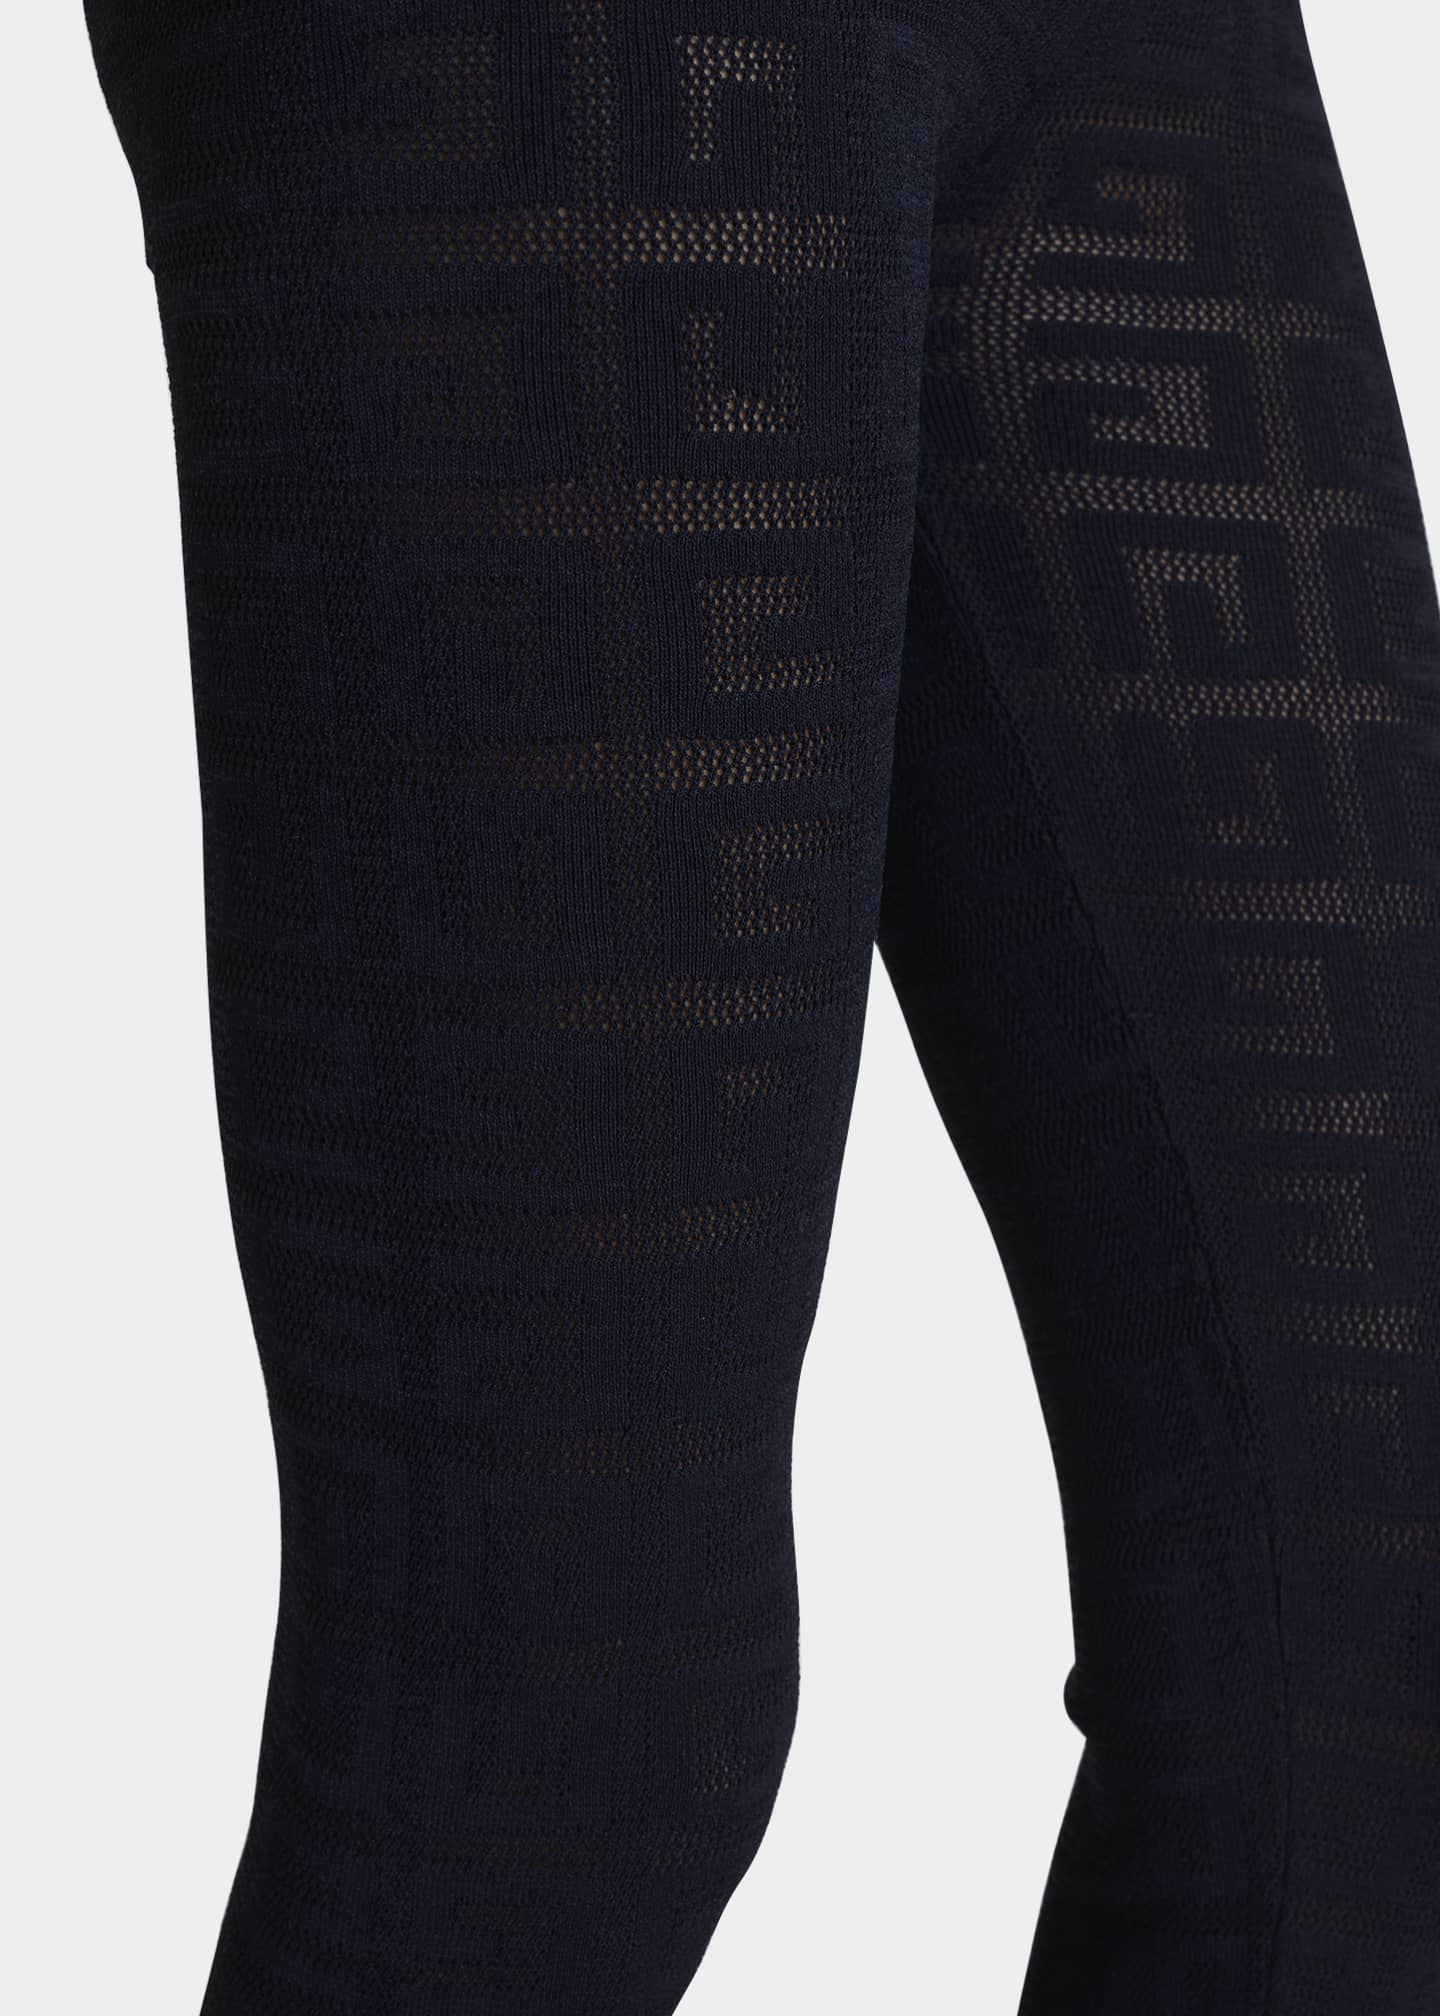 Givenchy Stretch Lace Monogram Legging in Black